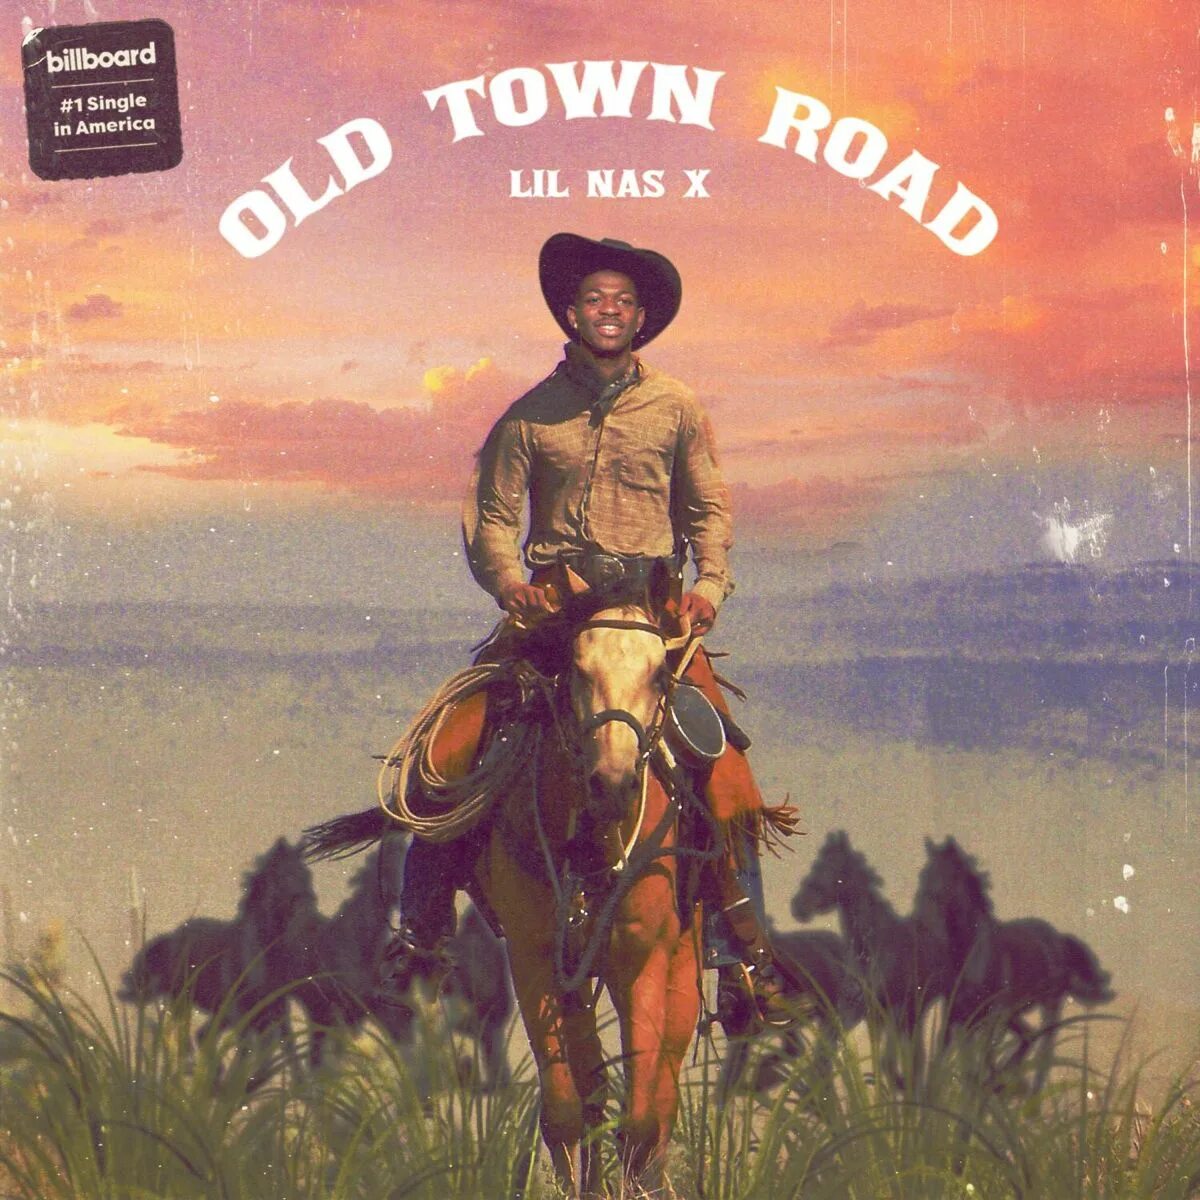 Old town remix. Lil nas x old Town Road. Old Town Road обложка. Lil nas x - old Town Road ft. Billy ray Cyrus. Old Town Road Remix обложка.